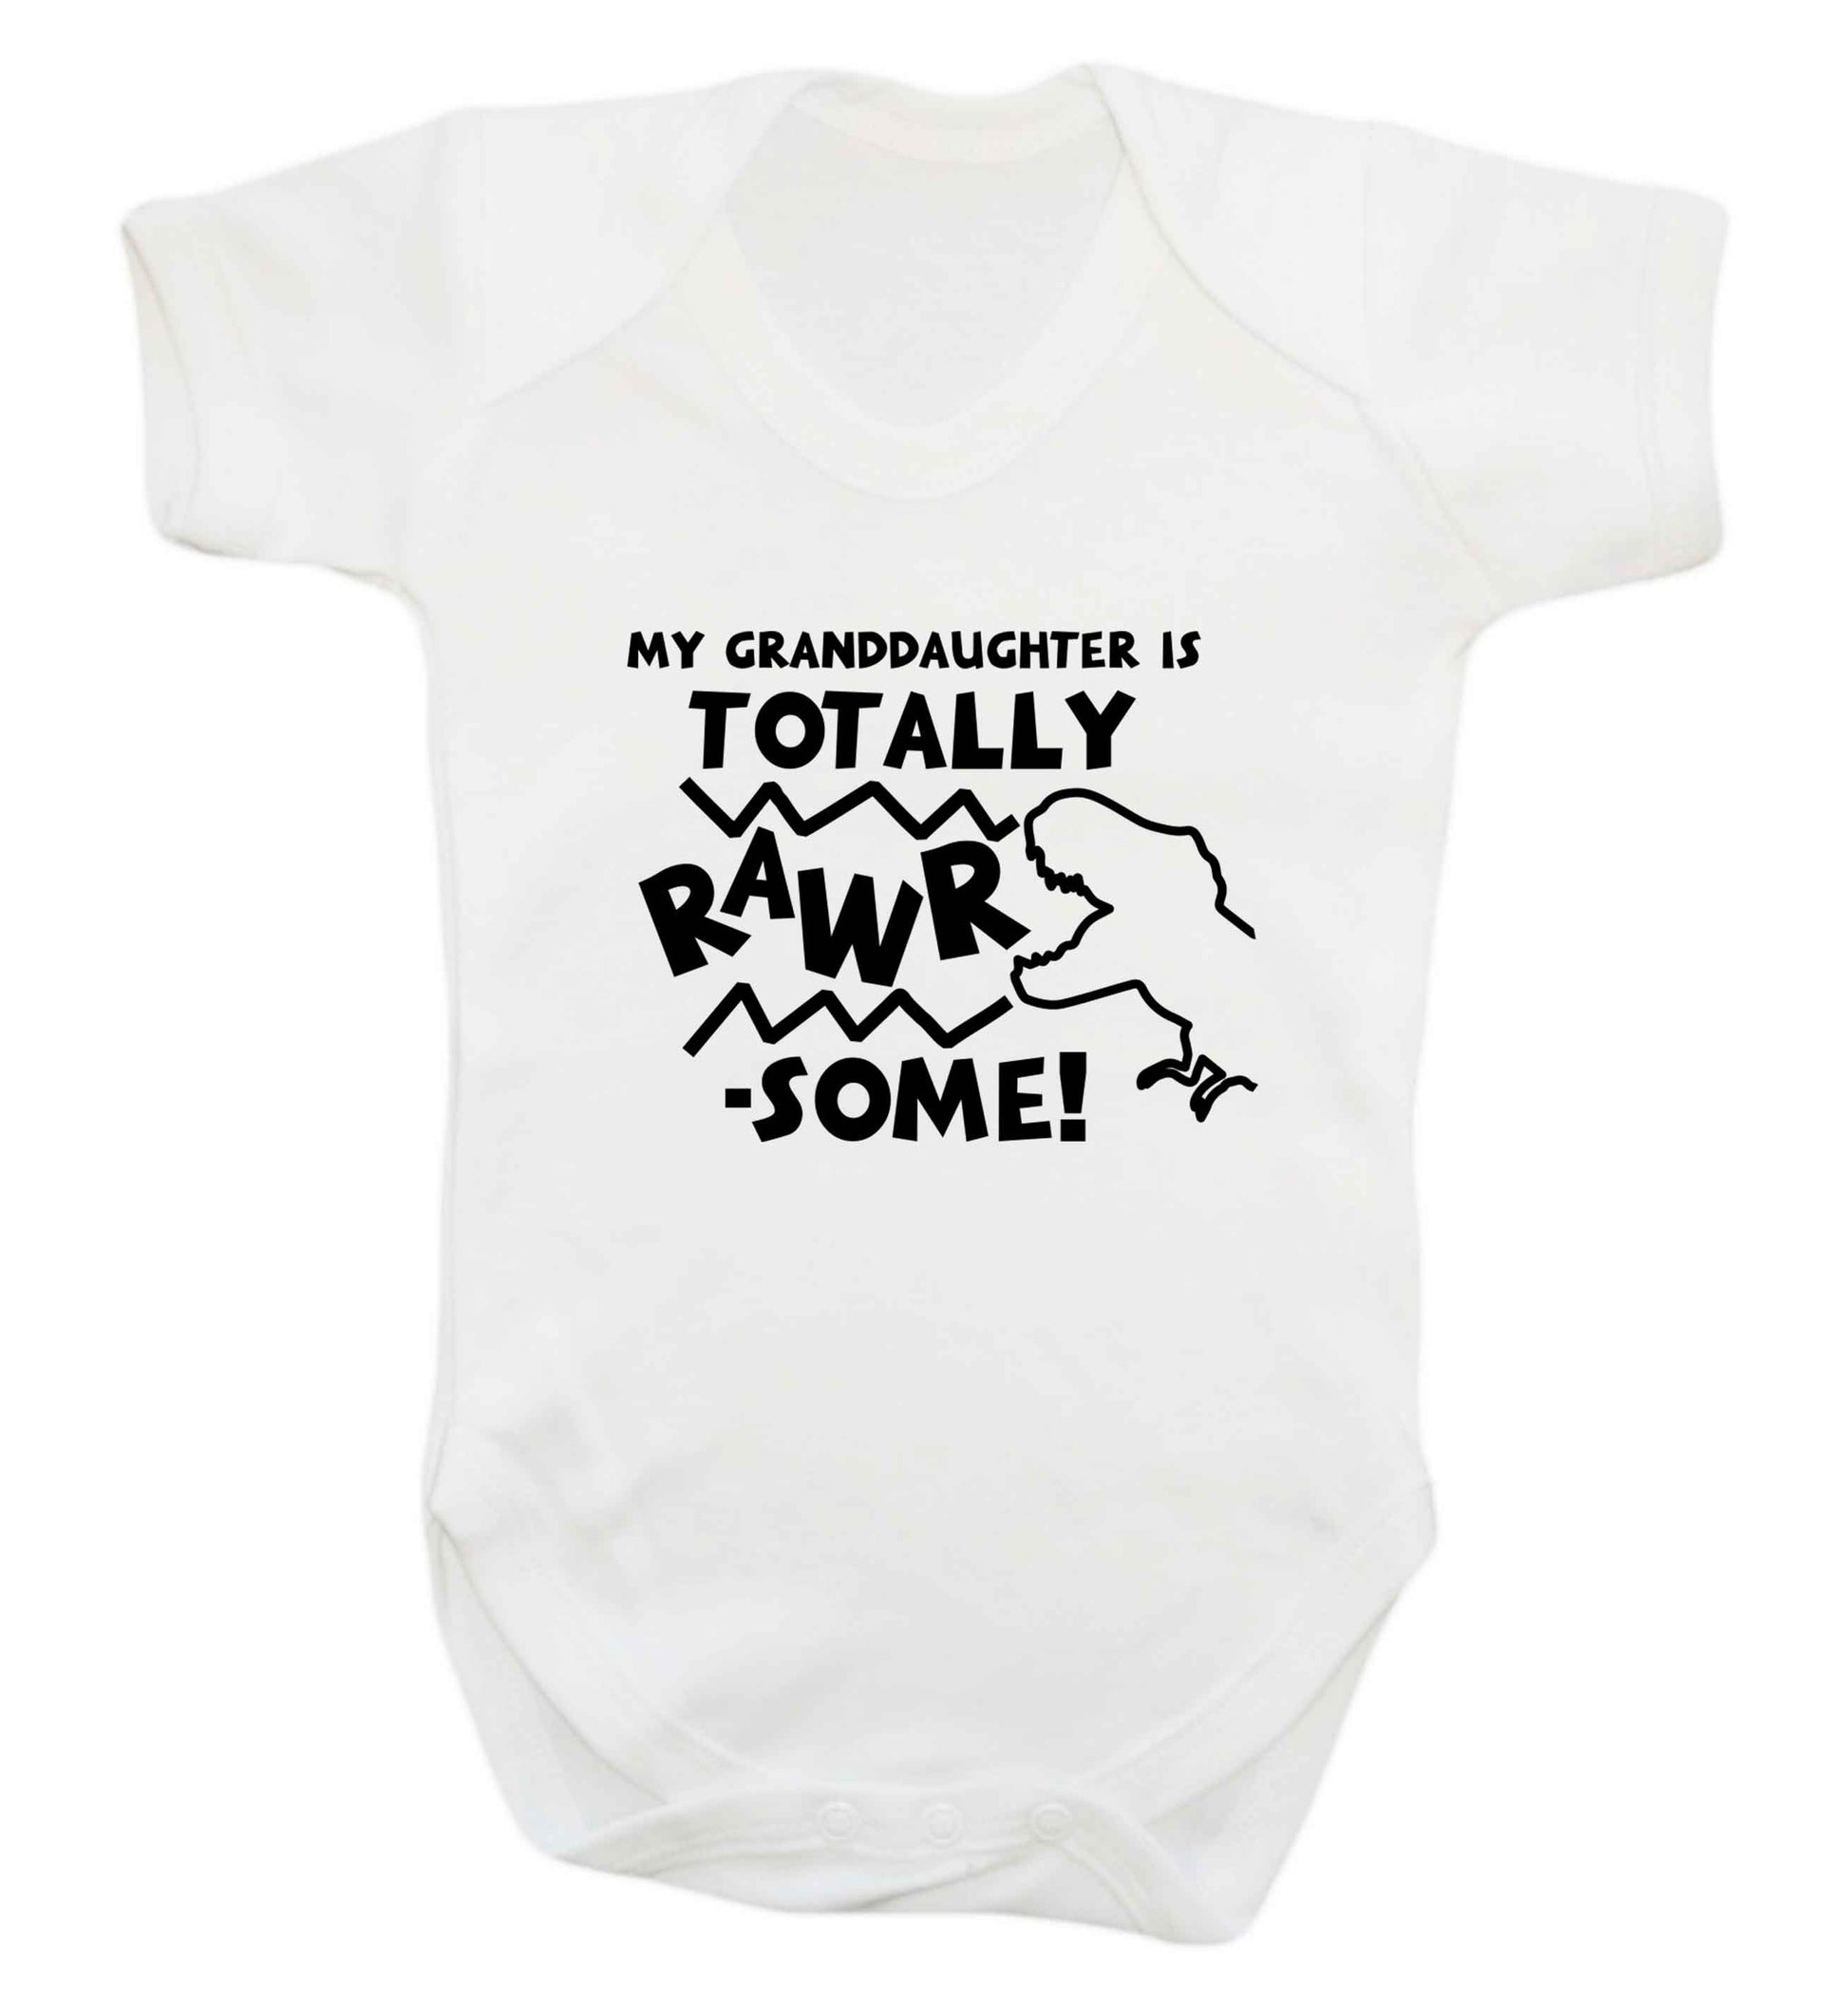 My granddaughter is totally rawrsome baby vest white 18-24 months